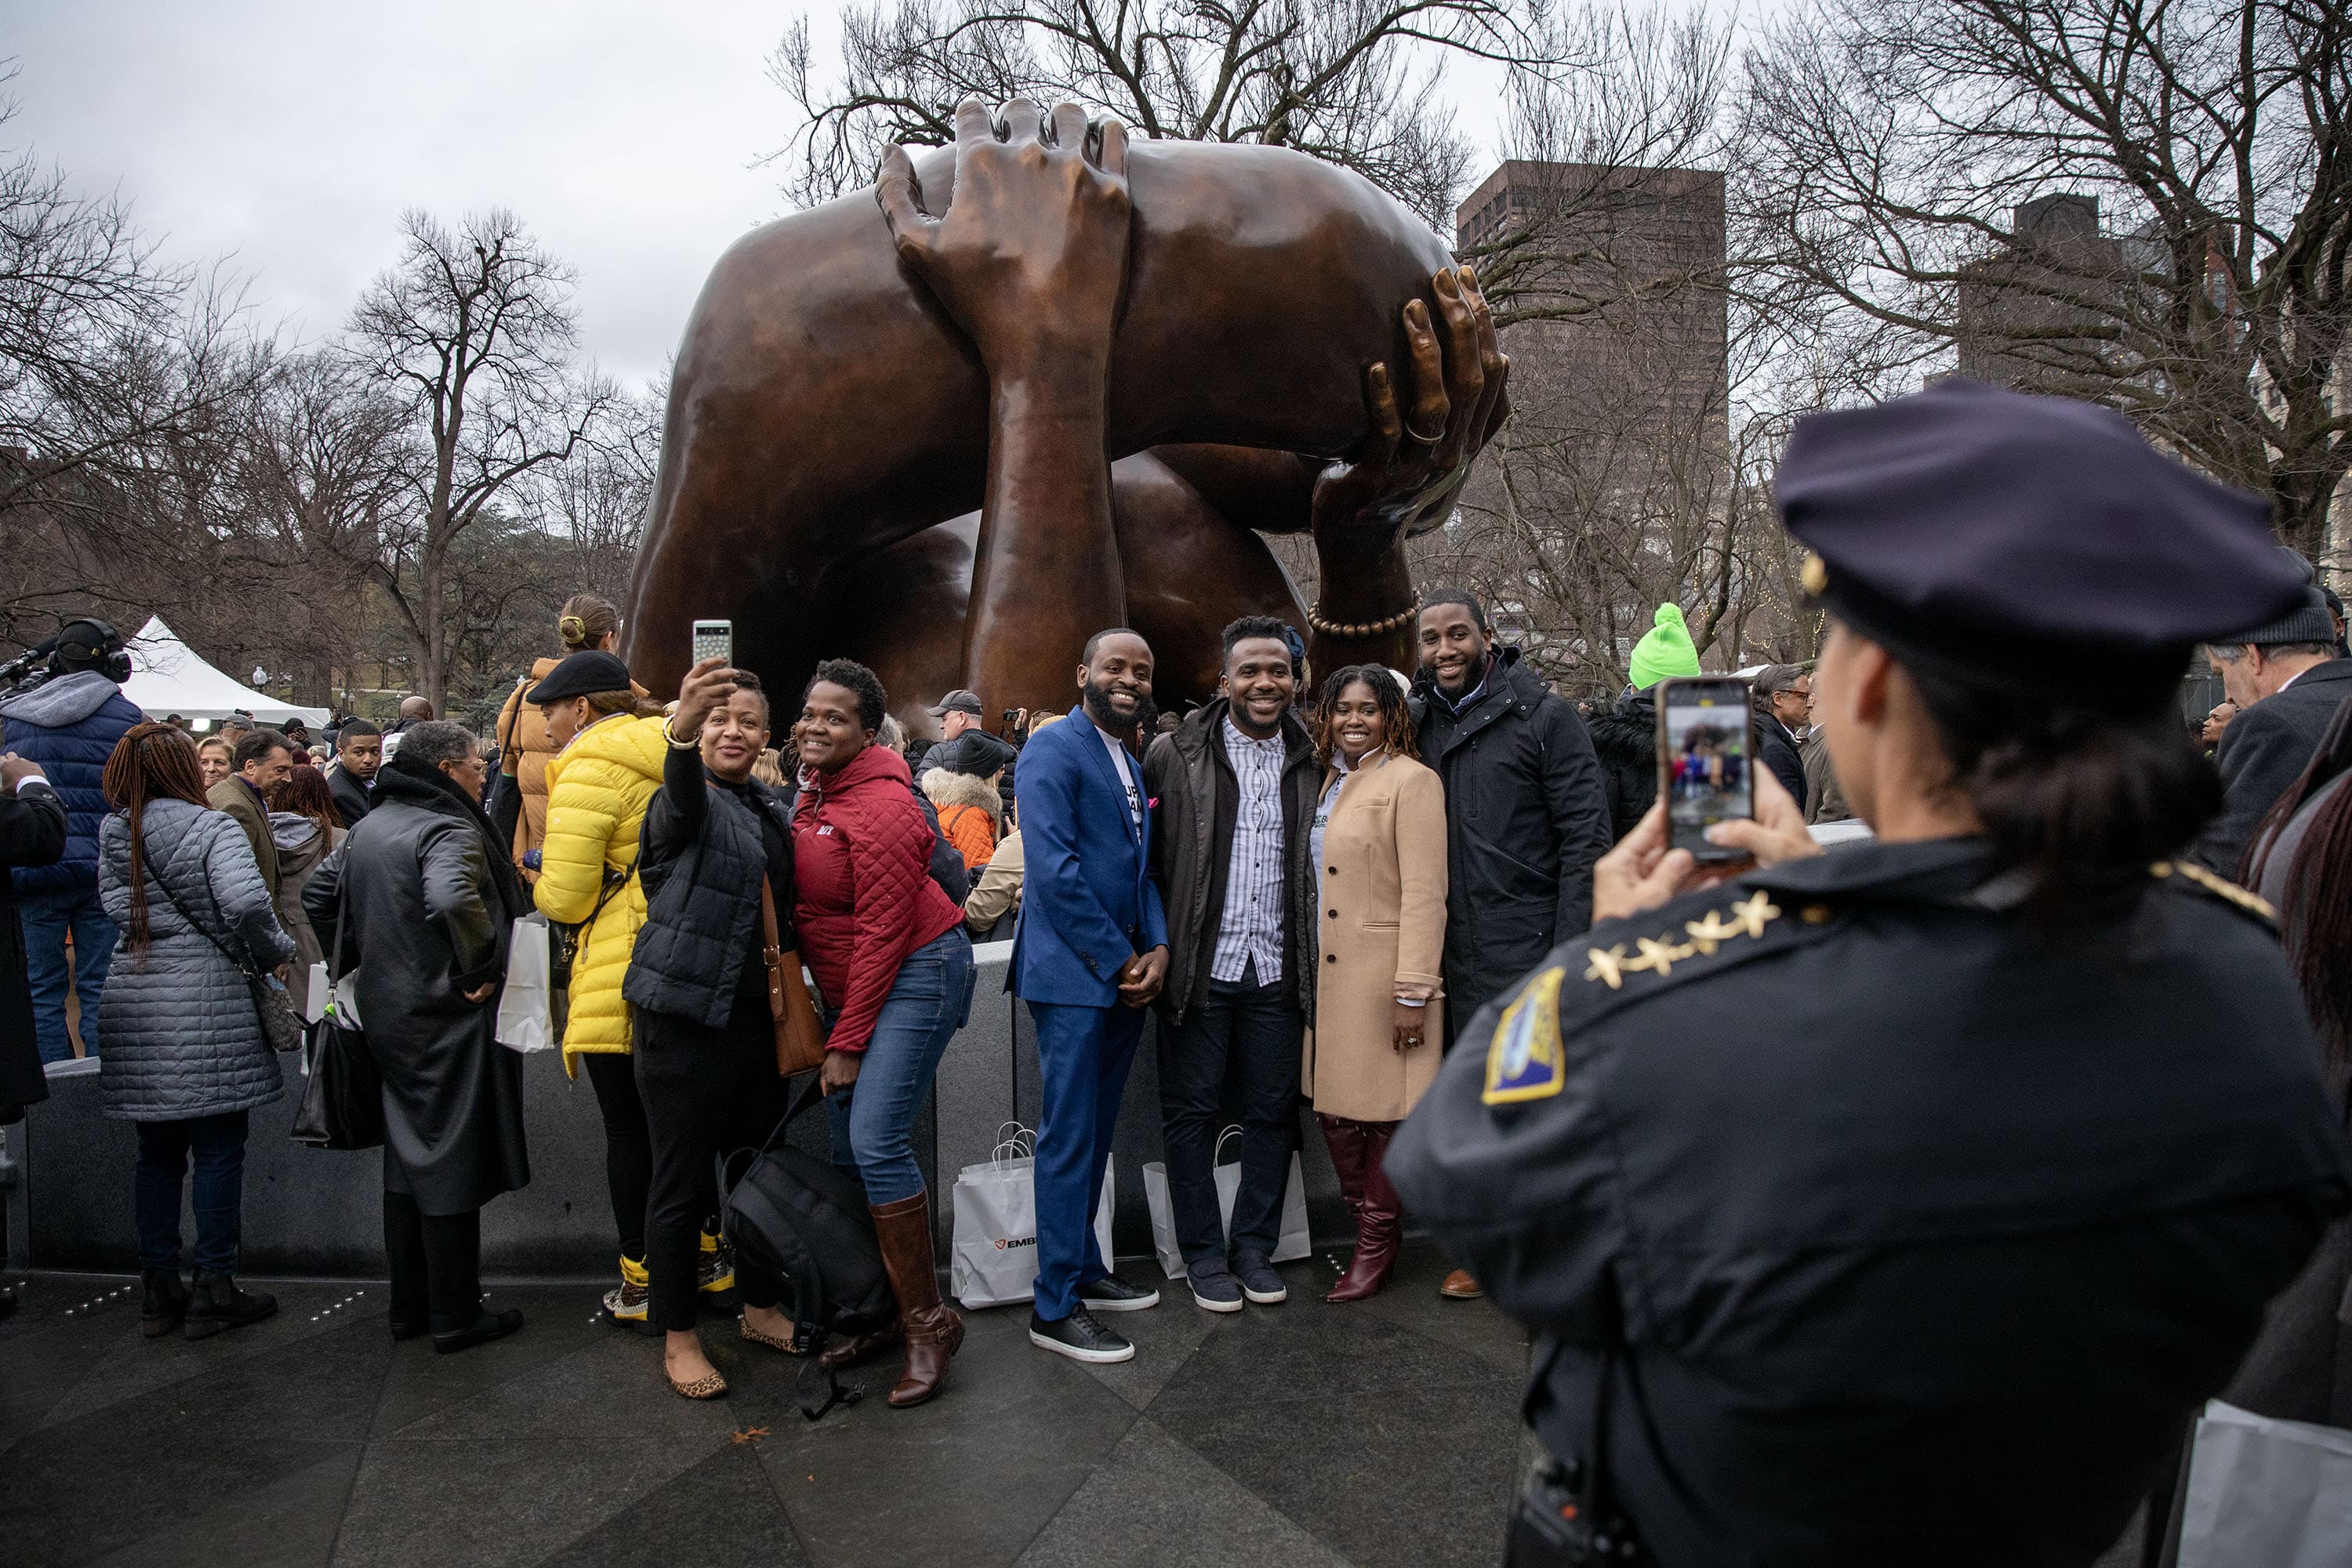 Attendees at the ceremony celebrate and takes selfies in front of the newly unveiled Embrace sculpture on Boston Common. (Robin Lubbock/WBUR)